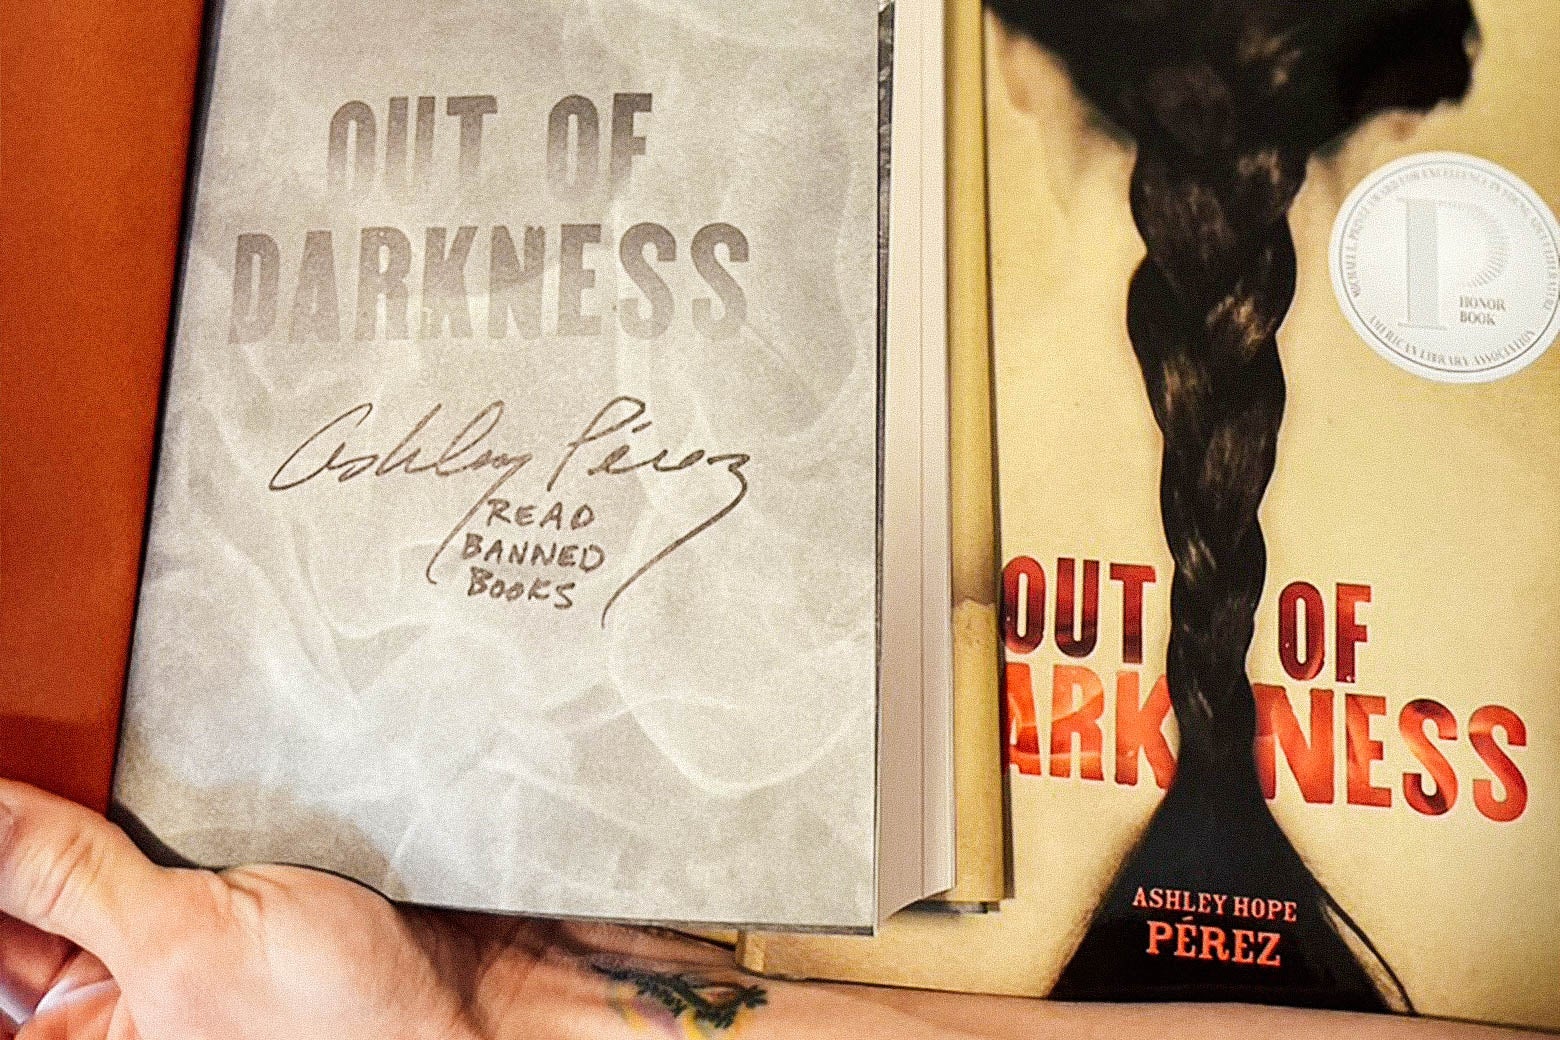 A signed copy of the book Out of Darkness with text that says, "Read banned books."